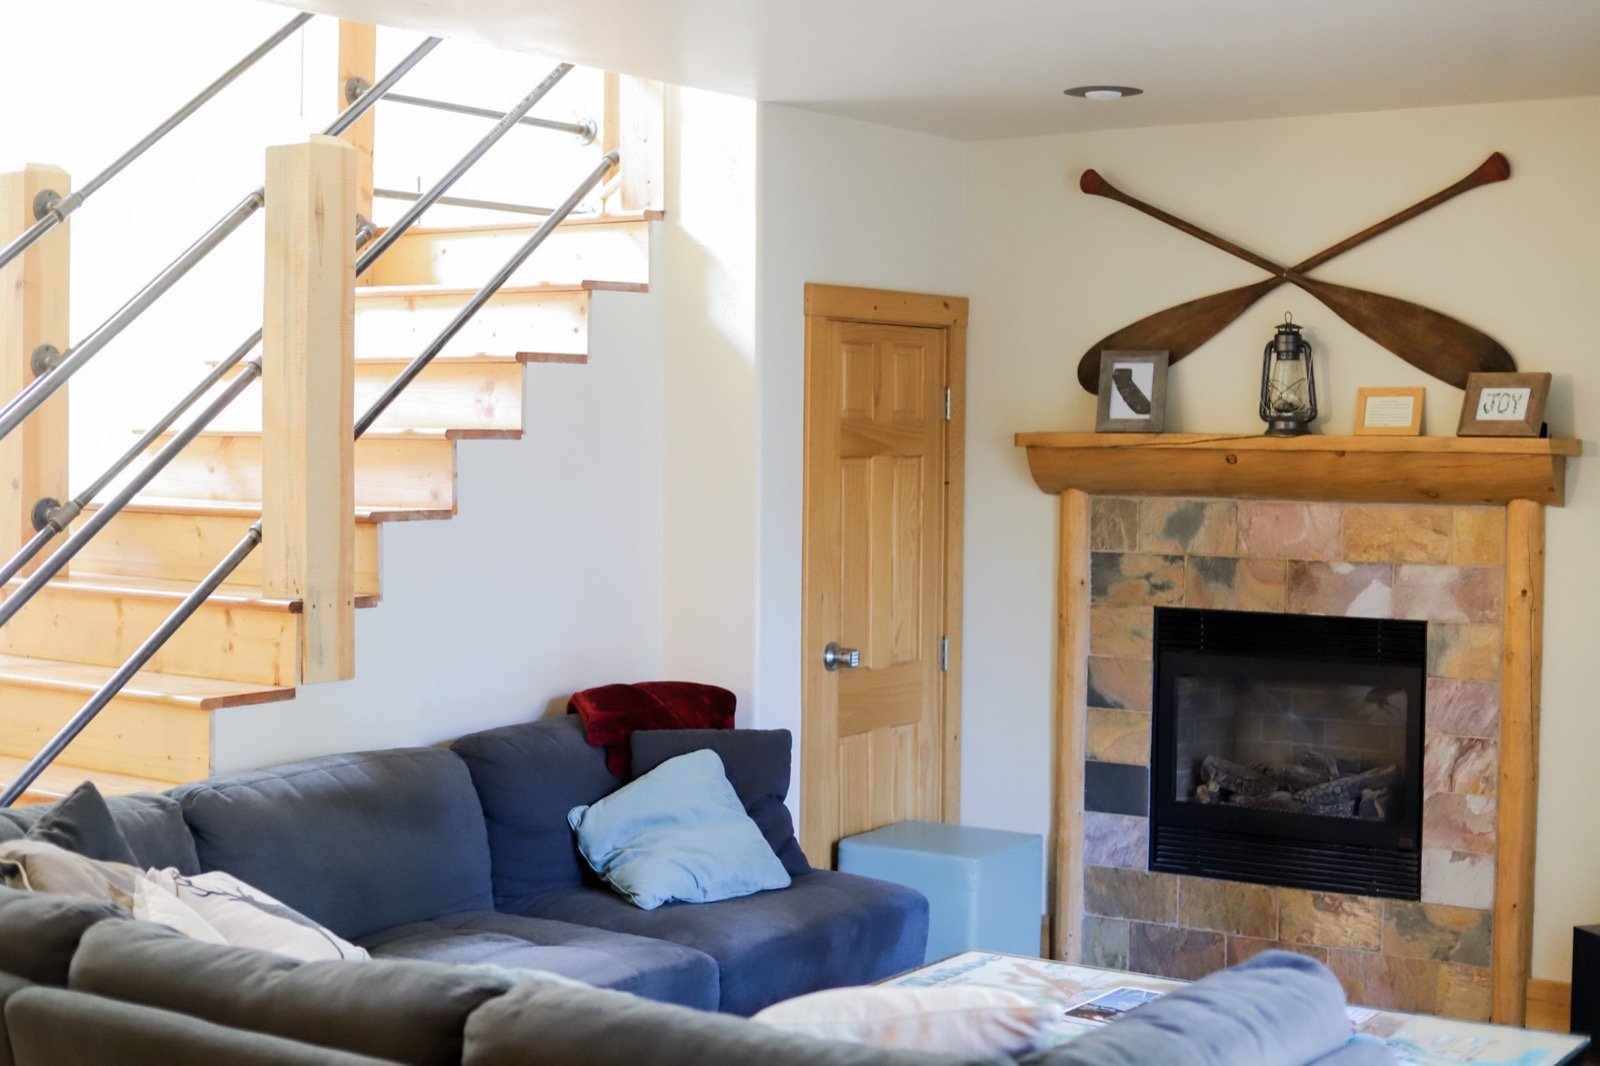 where to stay in south lake tahoe ft. RnR Vacation Rentals, short term rentals, long term rentals, 30 days, 90 days, hot tub, walk to ski lift, lakefront property, lments of style, la blogger, la roadtrip, family vacation